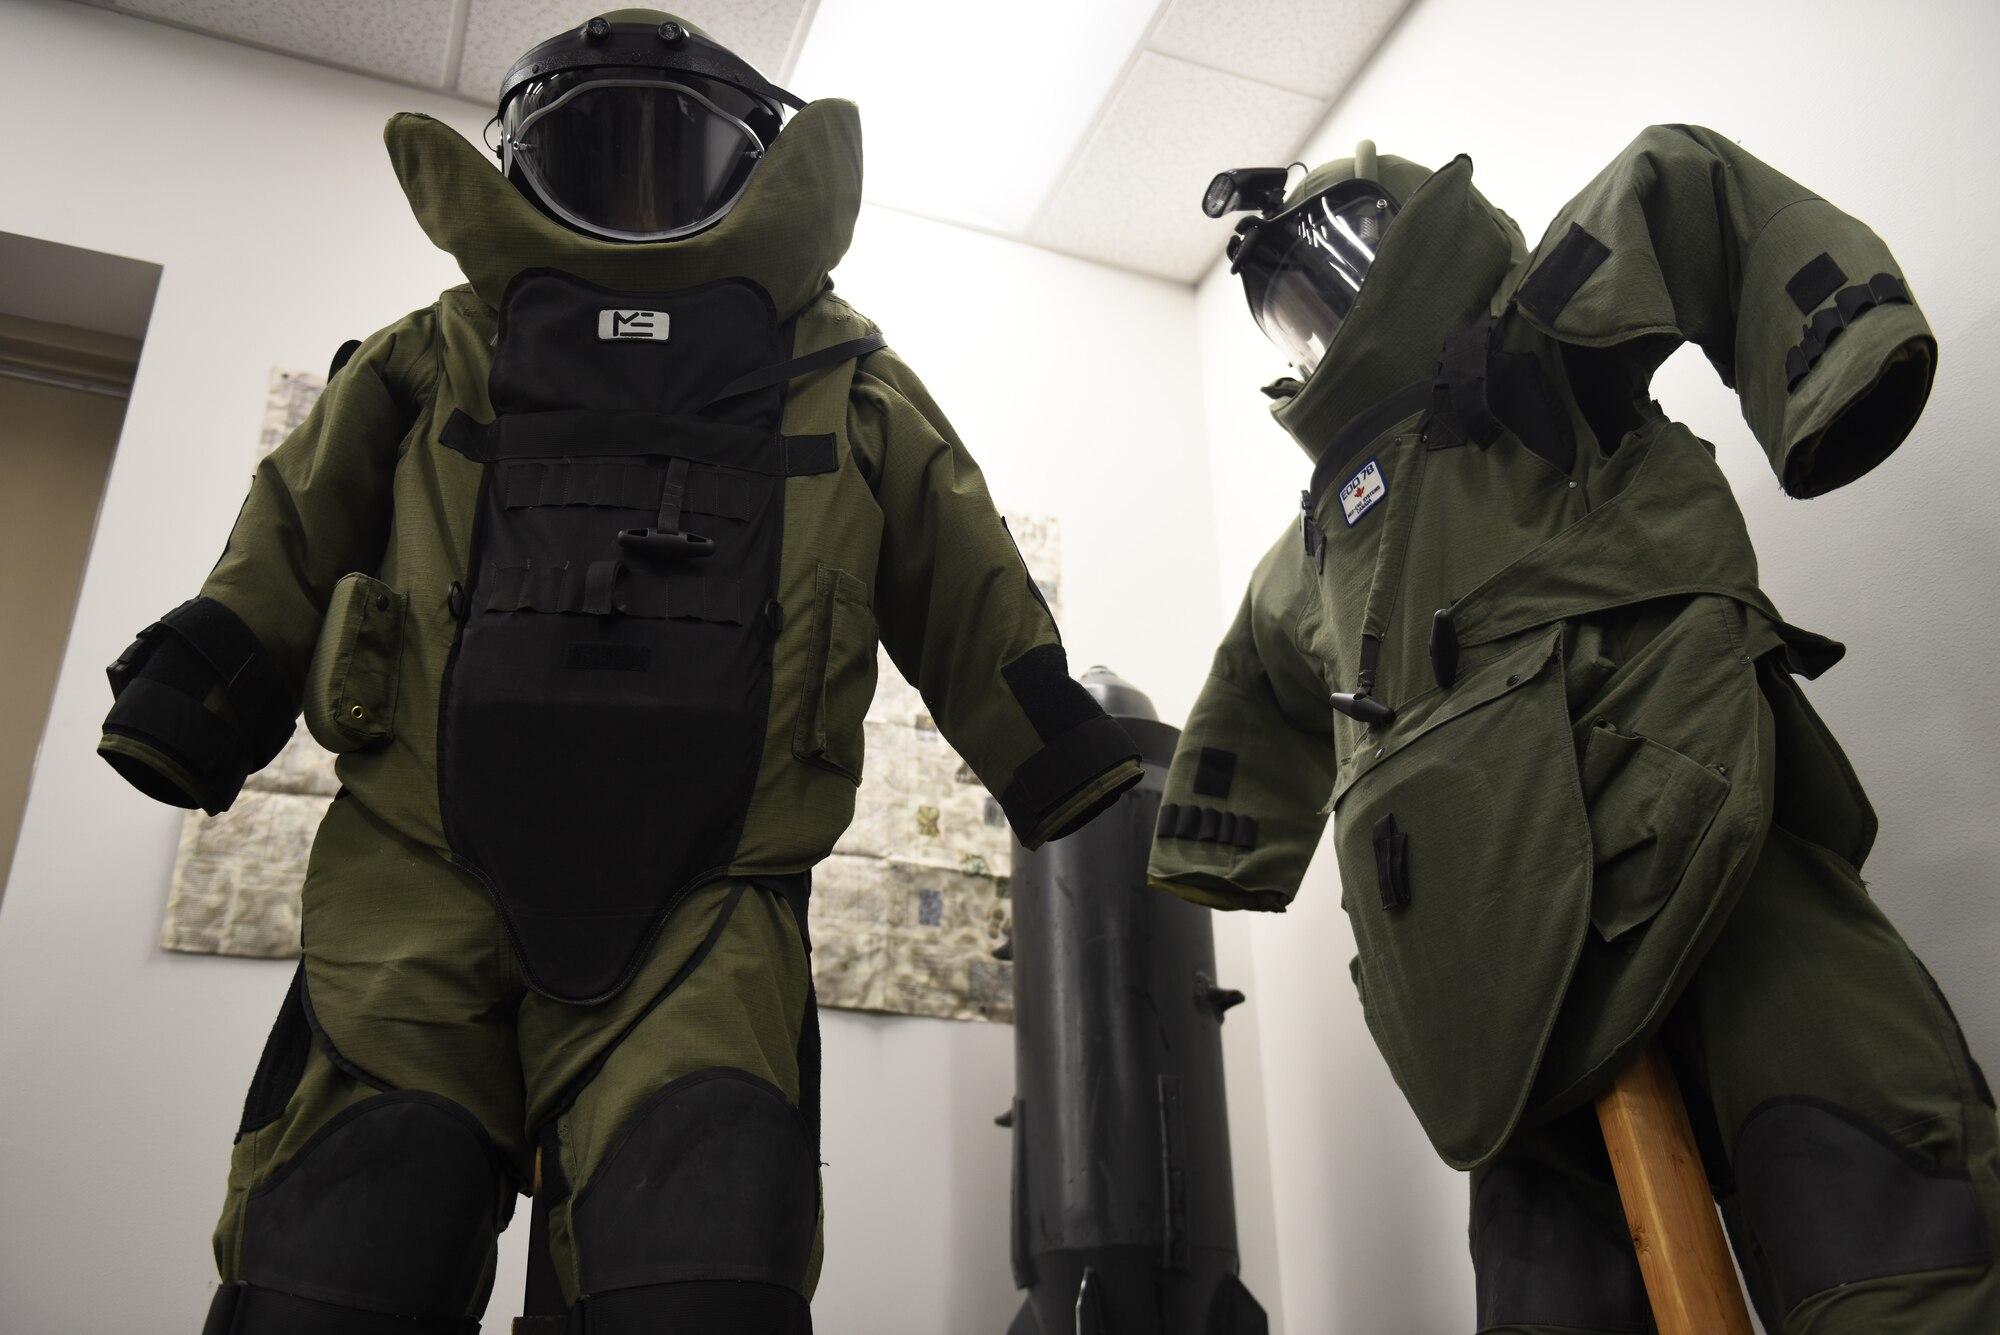 A bomb suit display rests in the corner of the training room at the 92nd Civil Engineer Squadron Explosive Ordinance Disposal buidling at Fairchild Air Force Base, Washington, Sept. 27, 2018. EOD Airmen provide support to VIPs, help civilian authorties with bomb problems, teach troops about bomb safety, and aid law enforcement. (U.S. Air Force photo/Airman 1st Class Lawrence Sena)